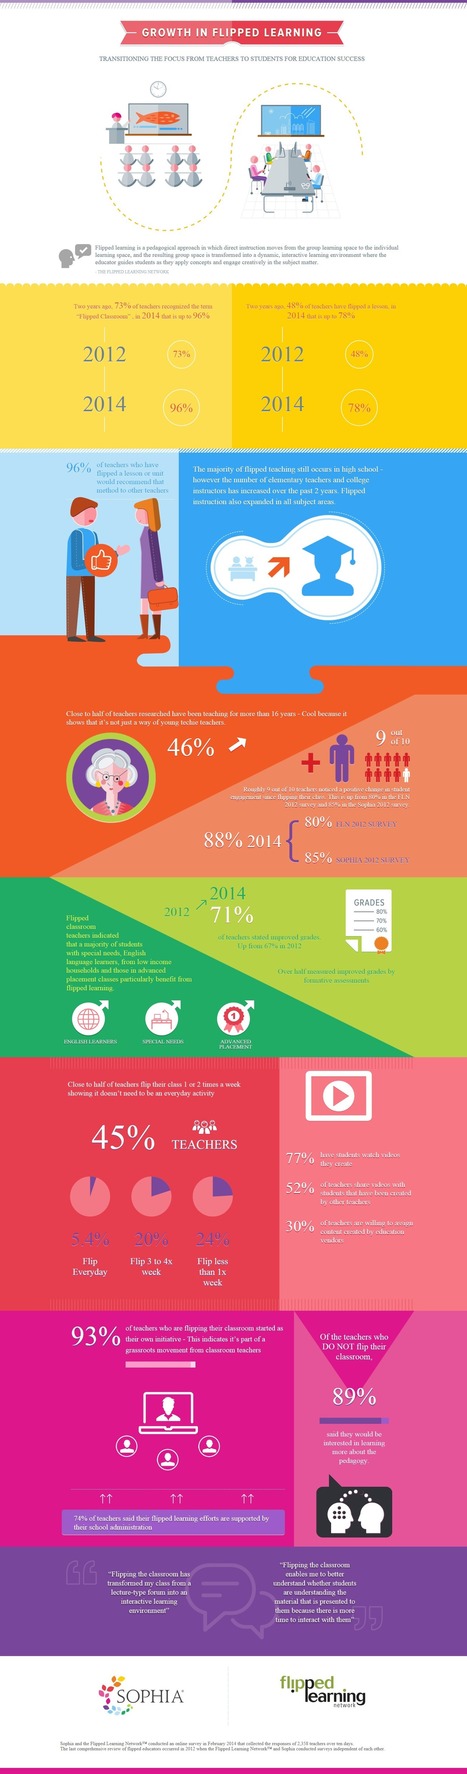 [Infographic] Growth in Flipped Learning - EdTechReview™ (ETR) | Art, a way to feel! | Scoop.it